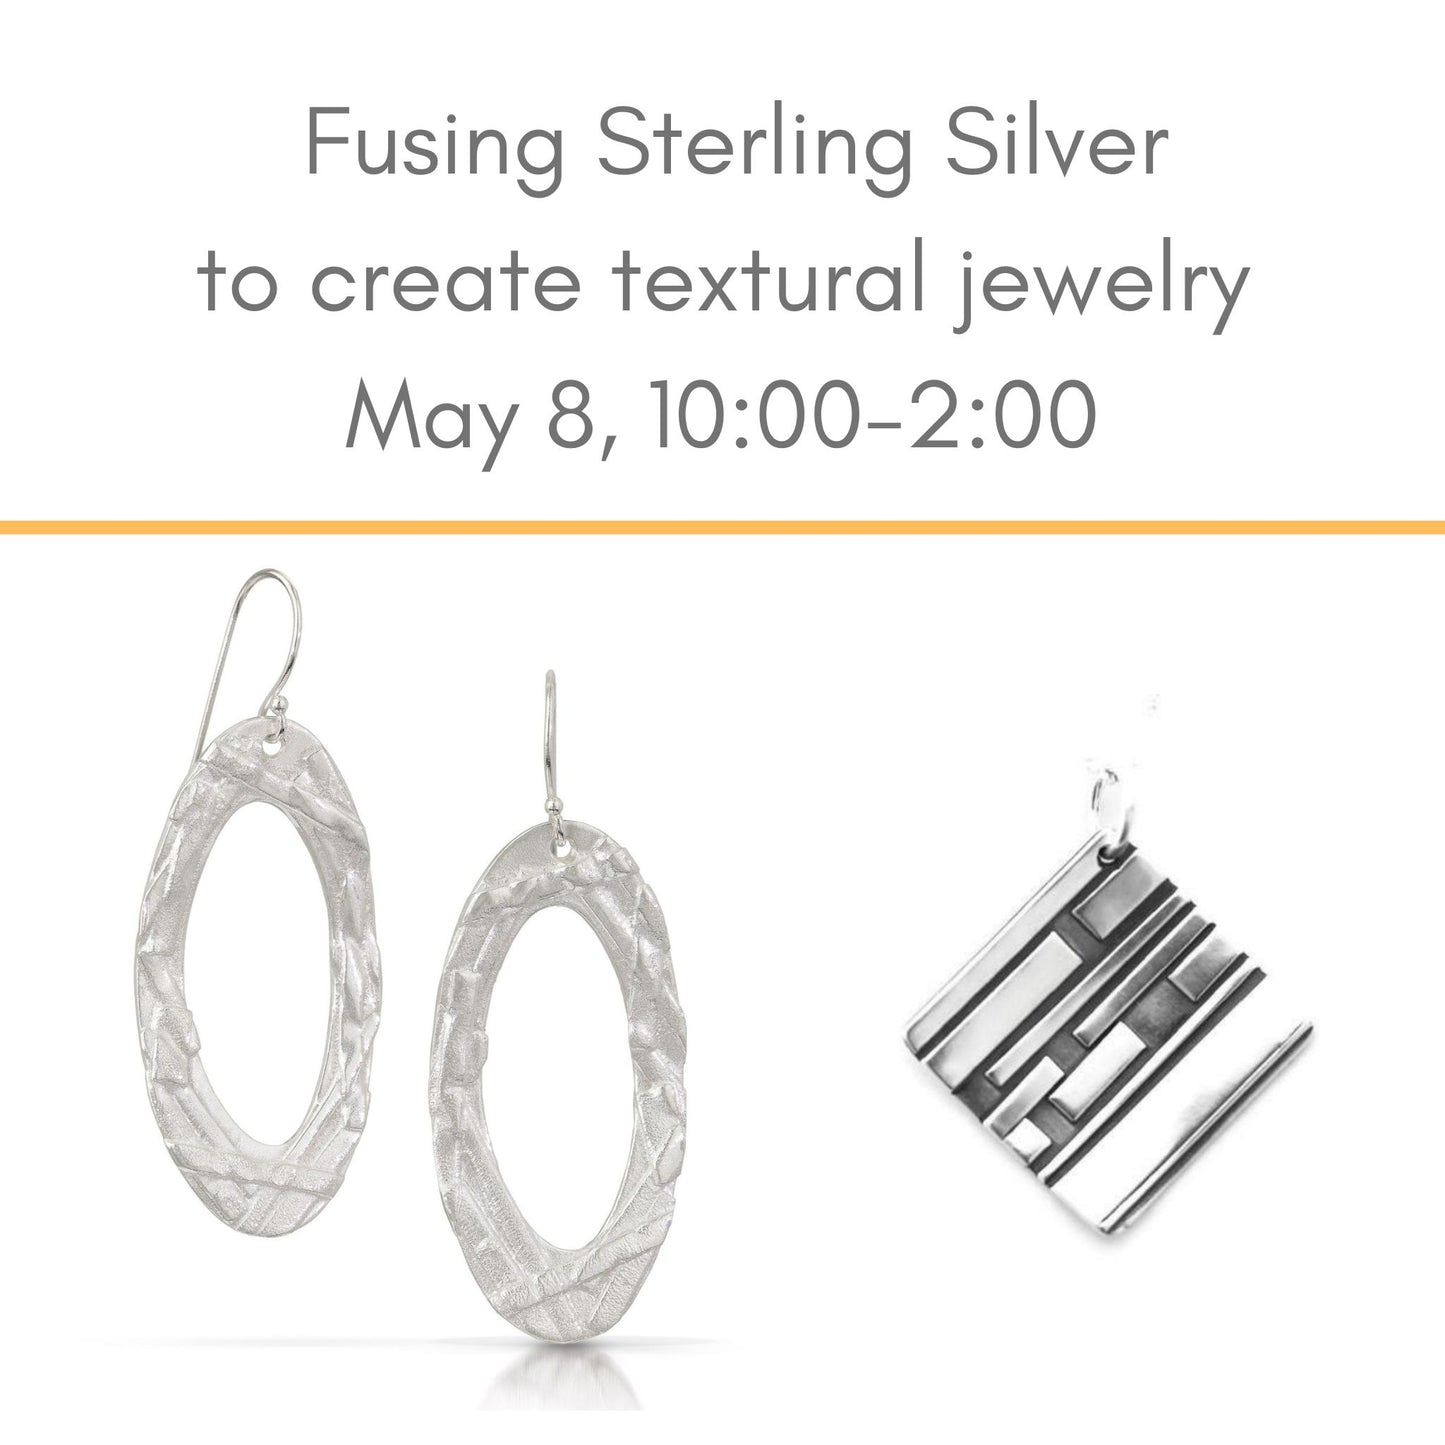 fusing sterling silver class May 8 at Silver Peak Studio